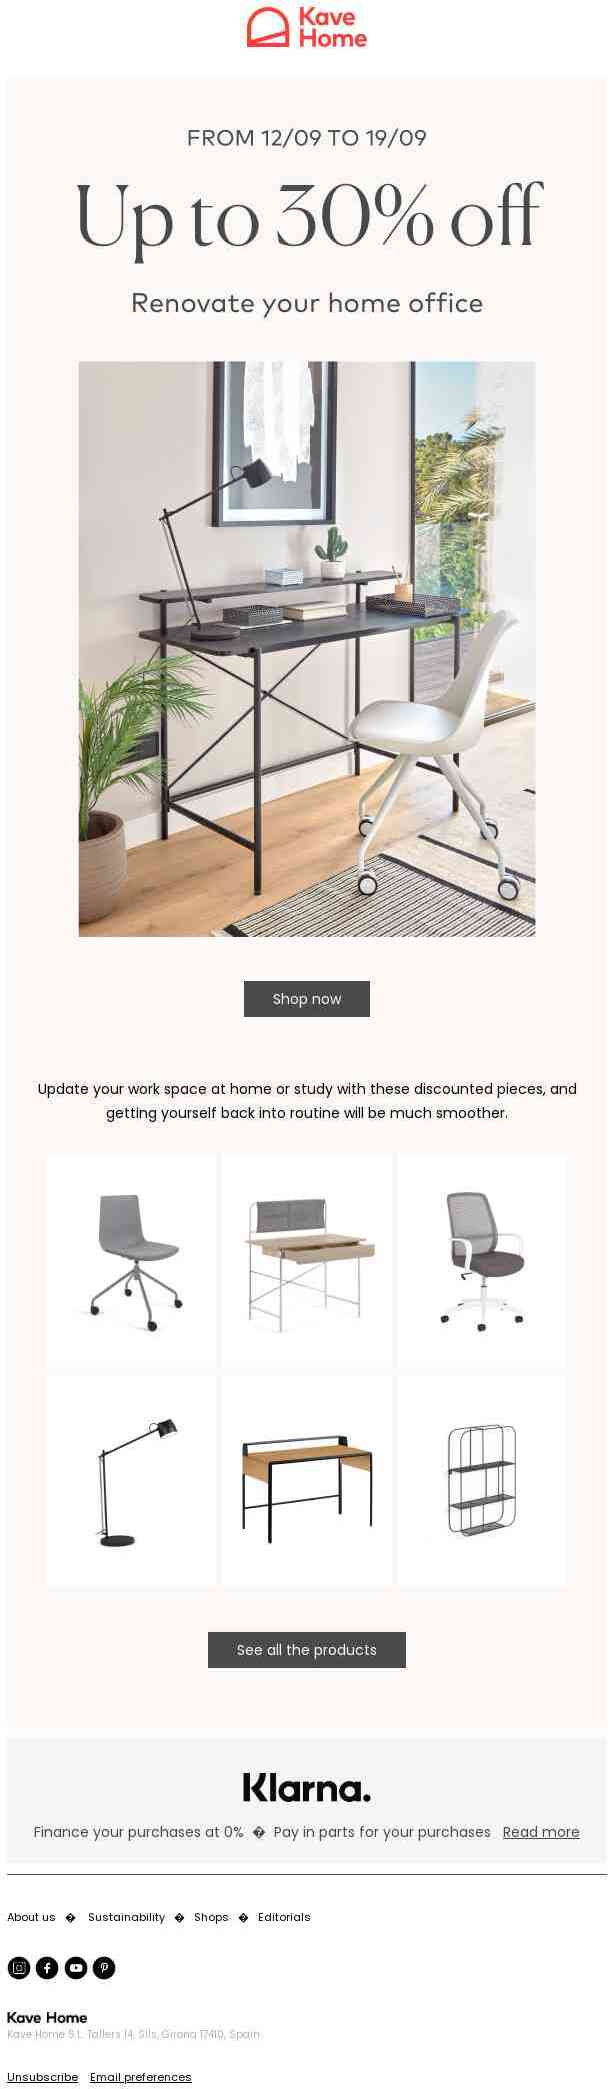 Discounted pieces to renovate your home office